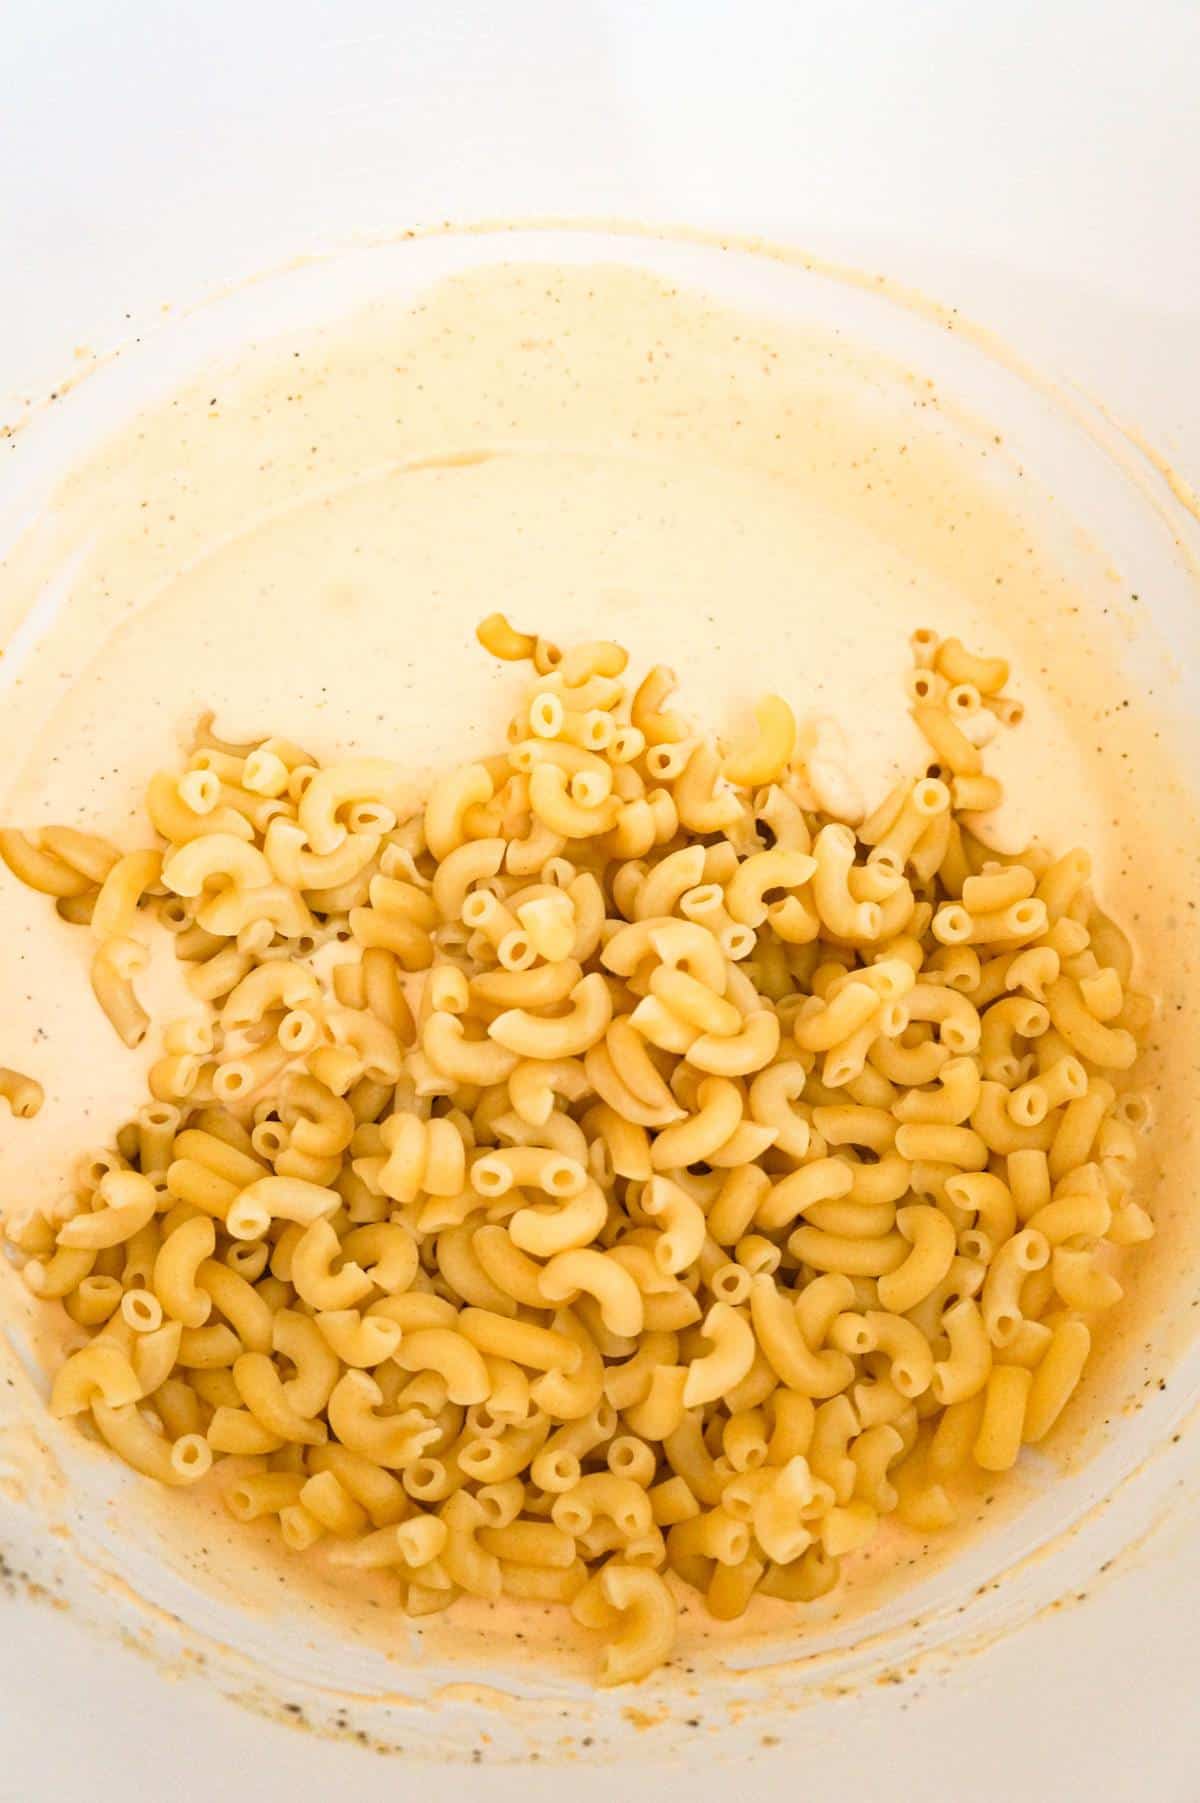 cooked macaroni noodles on top of heavy cream and cheddar soup mixture in a mixing bowl